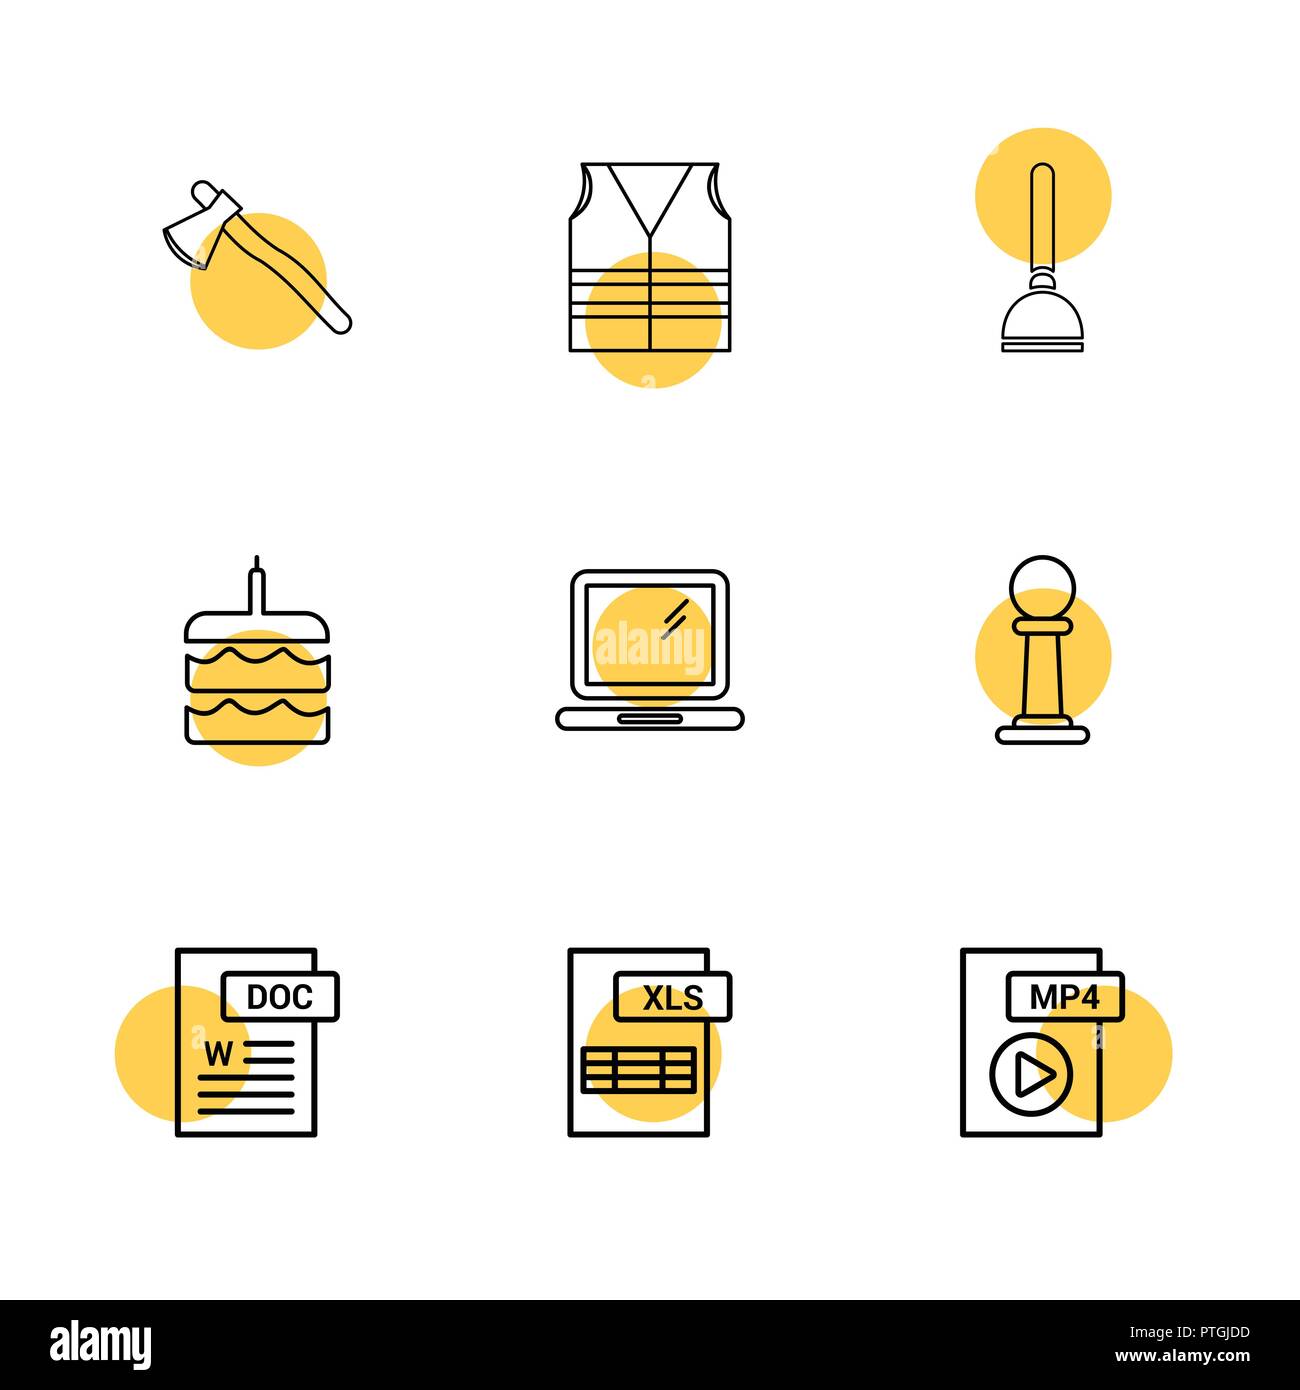 Axe , safety jacket , pump , cake , word document , laptop , mp4 file , pole ,excel file , icon, vector, design,  flat,  collection, style, creative,  Stock Vector